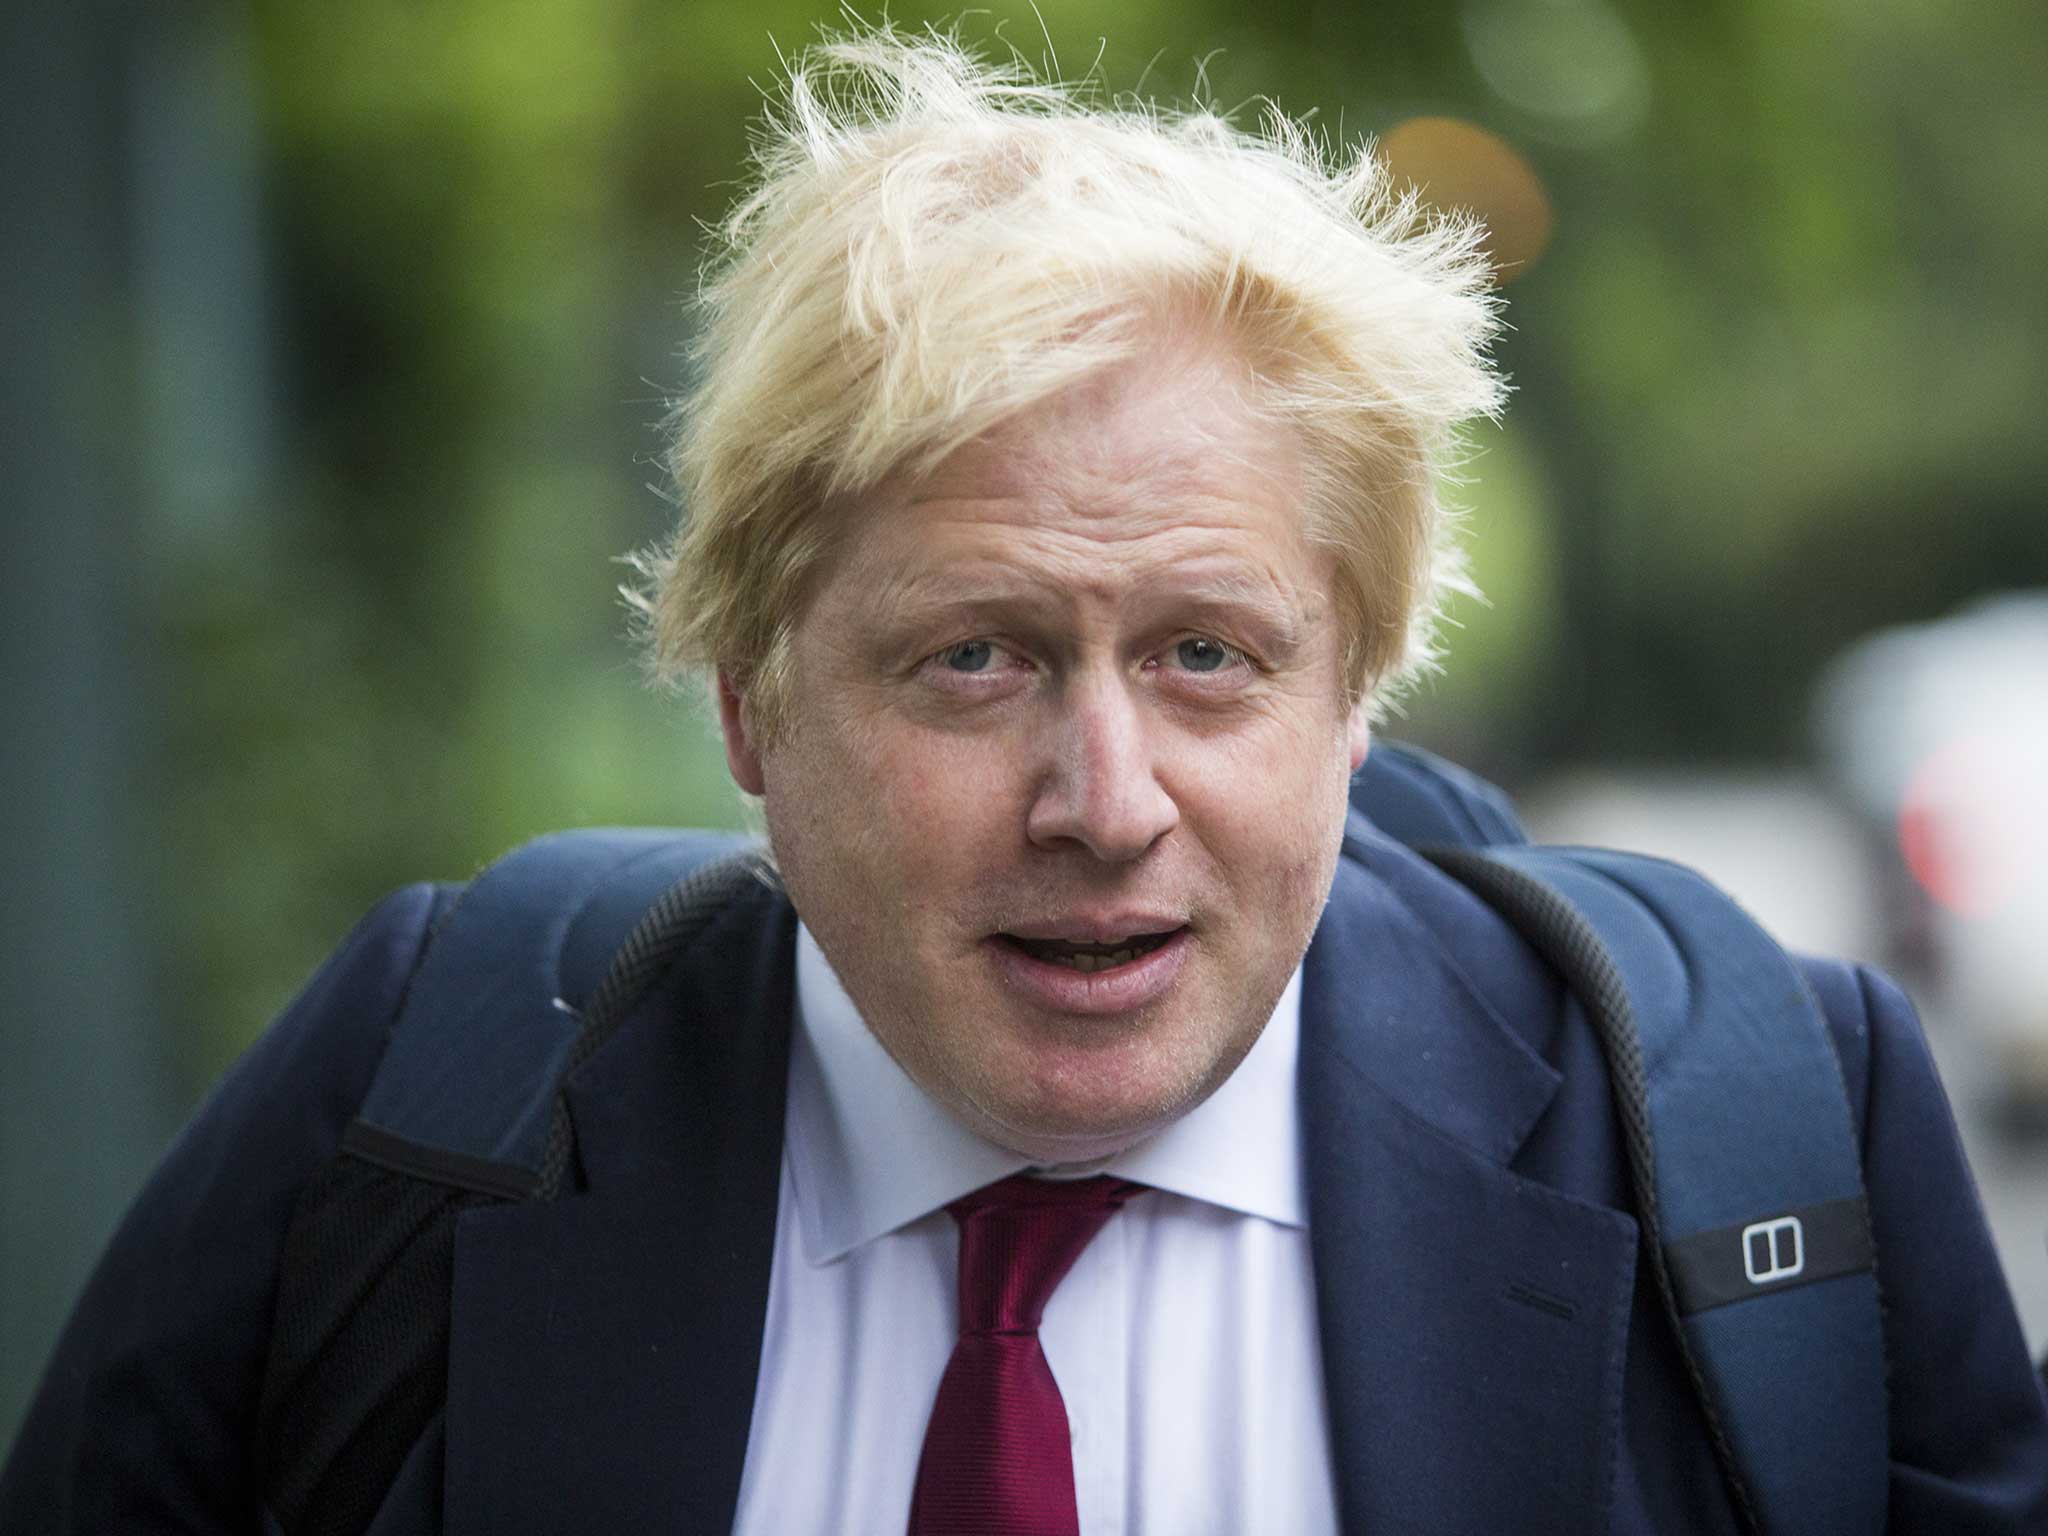 There have been a lot of raised eyebrows following Theresa May's decision to appoint Mr Johnson, leader of the Brexit campaign, as foreign minister.